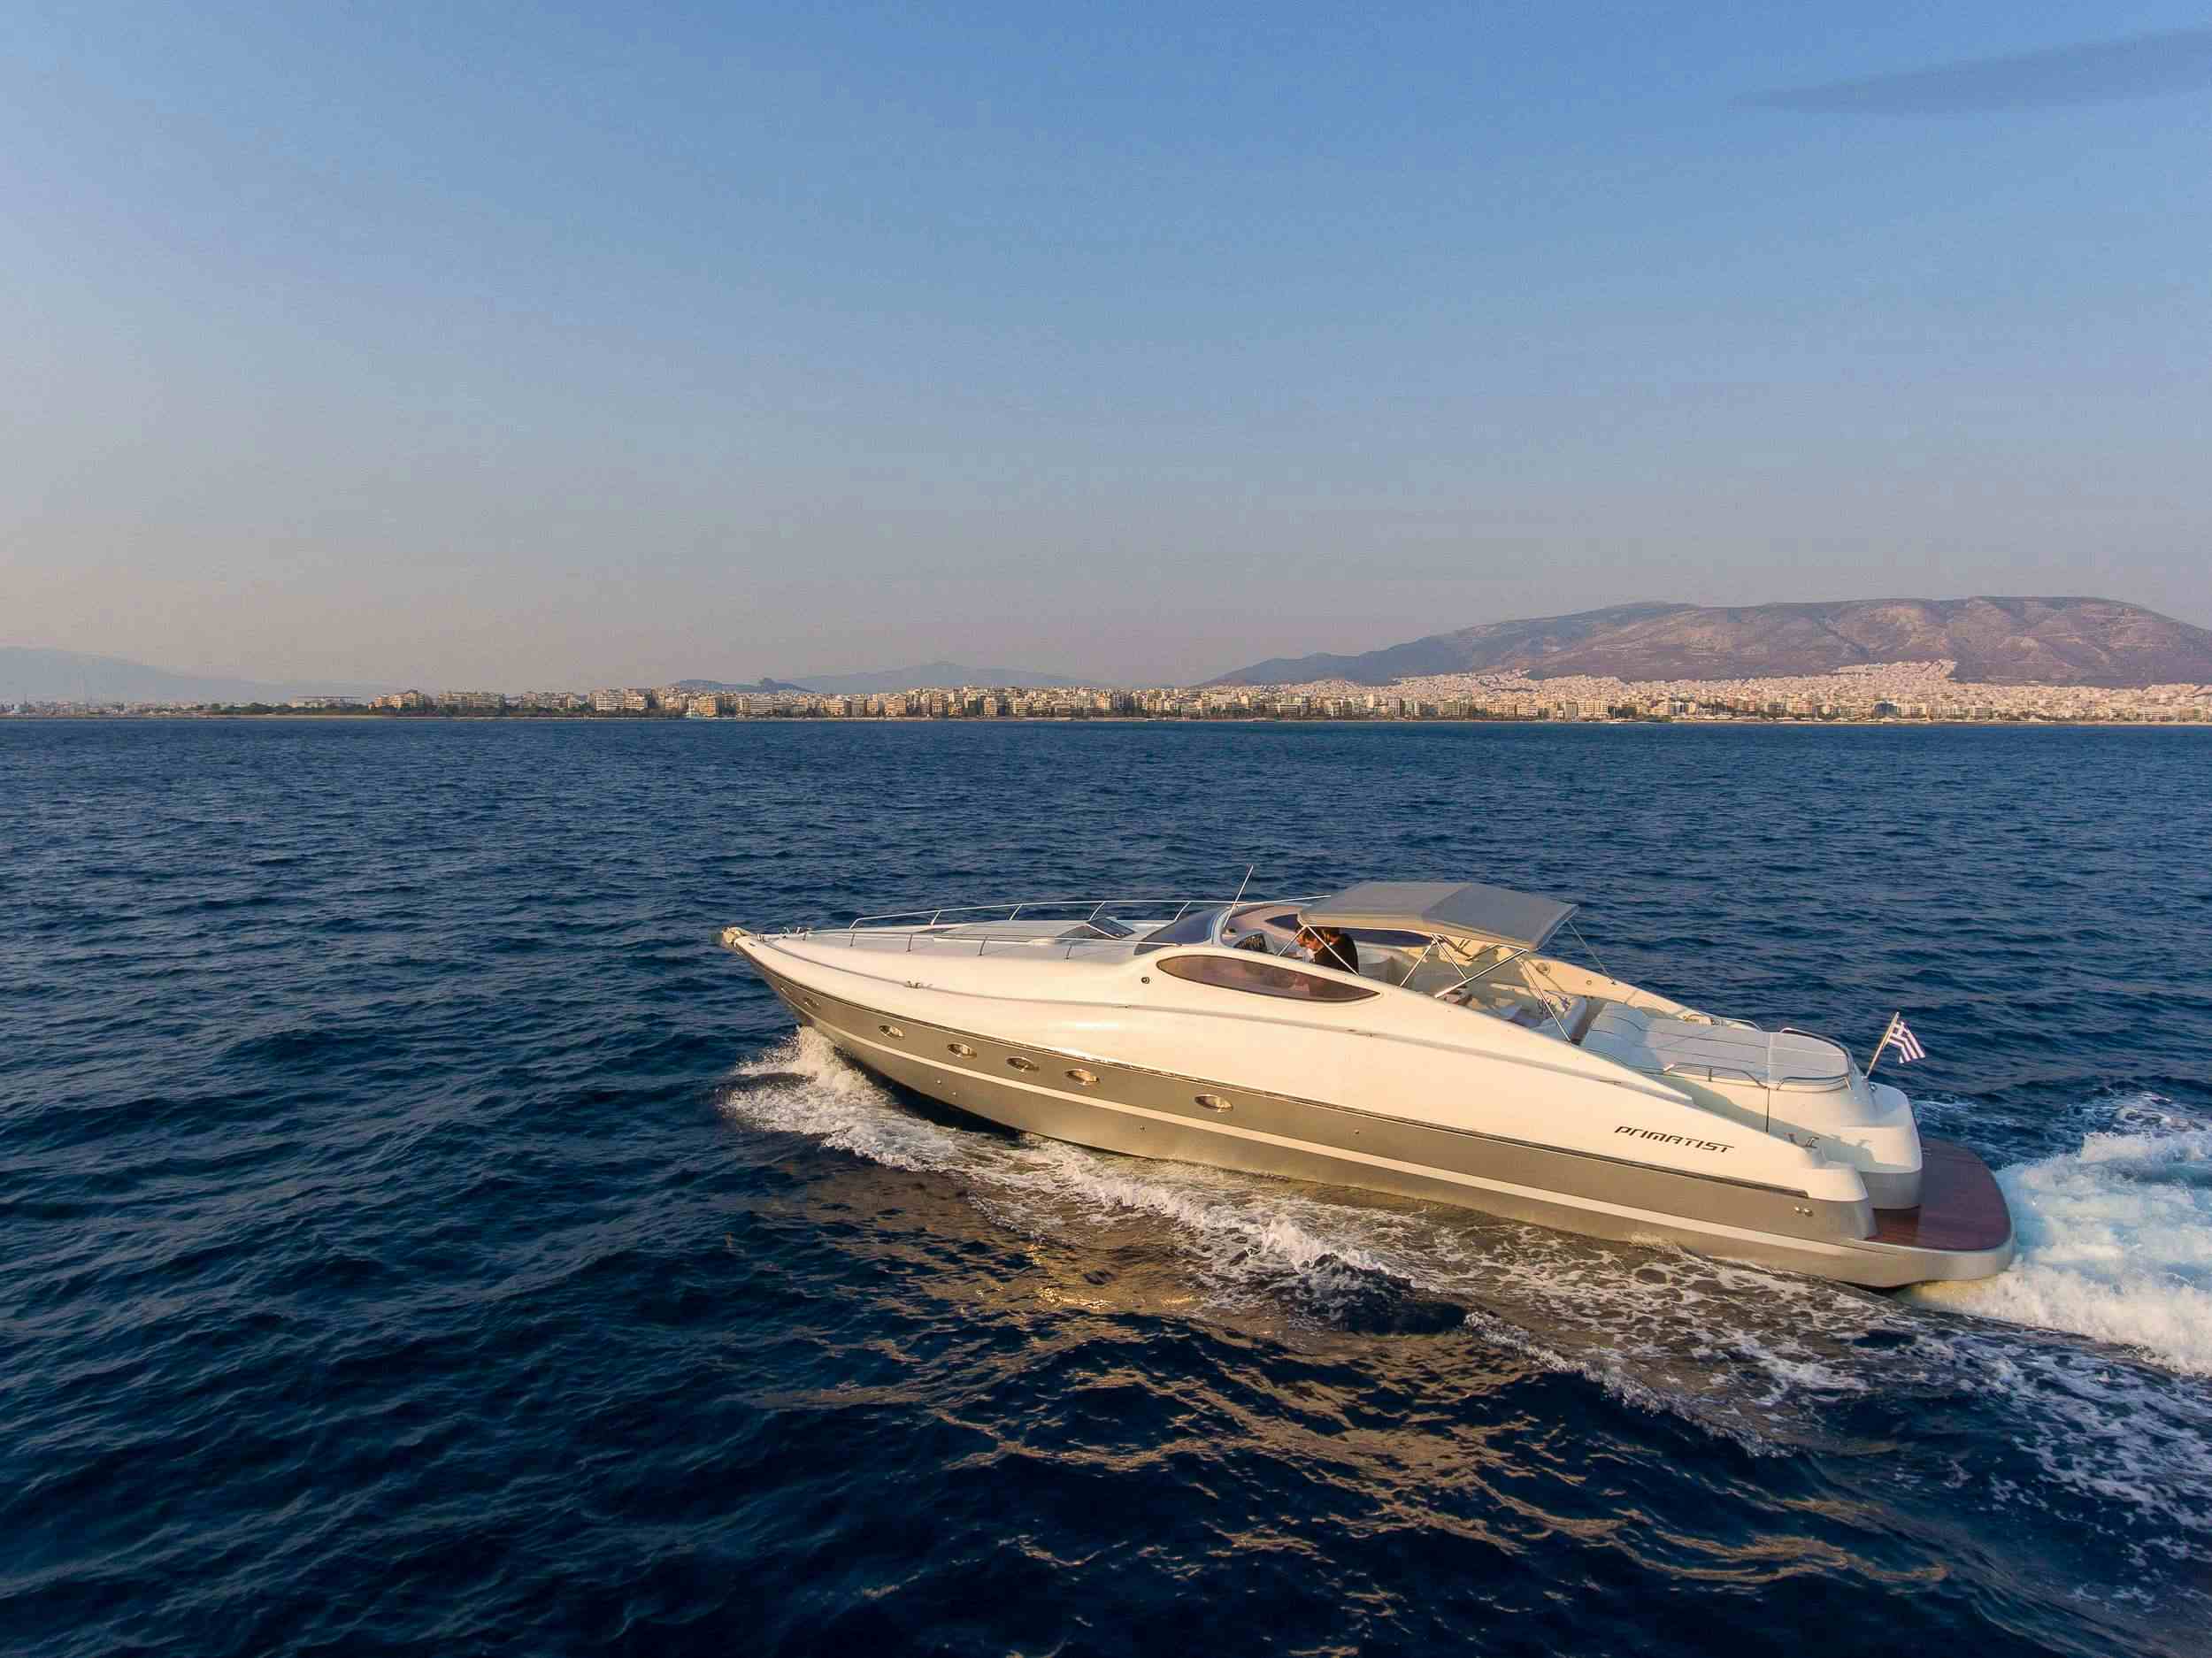 Edal - Yacht Charter Neos Marmaras & Boat hire in Greece 1